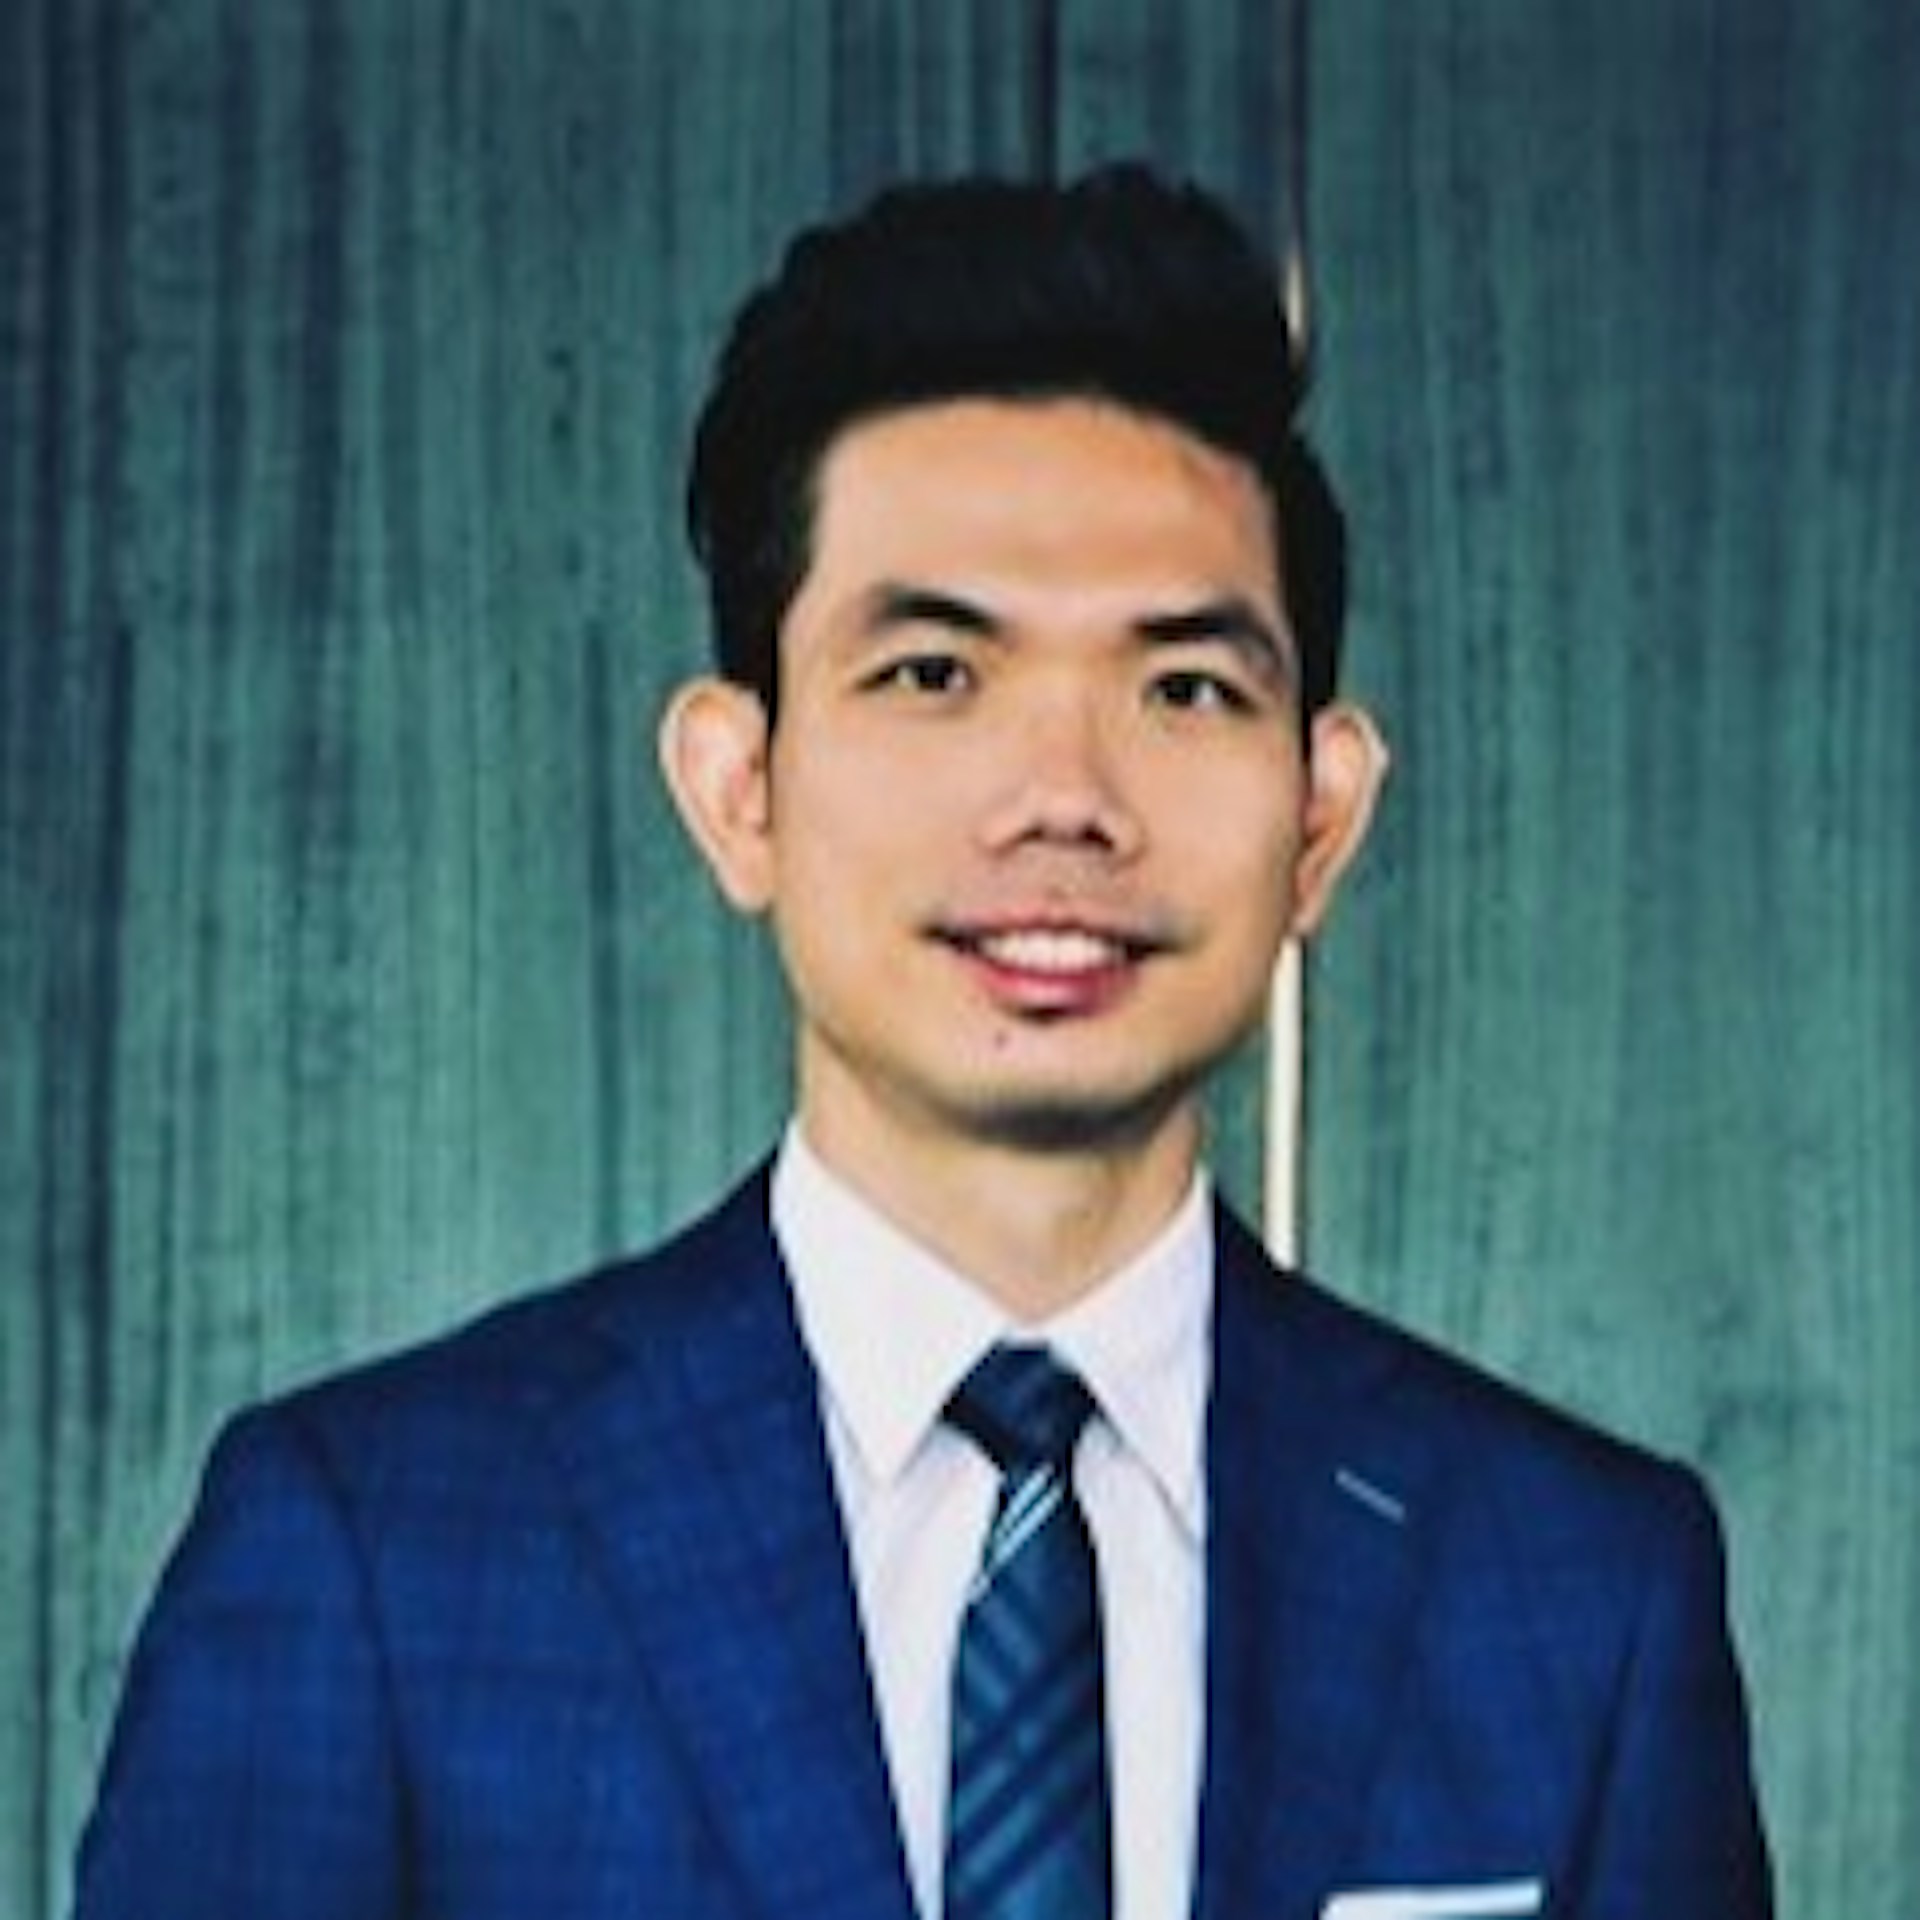 An image of Hector Tan, an asian male